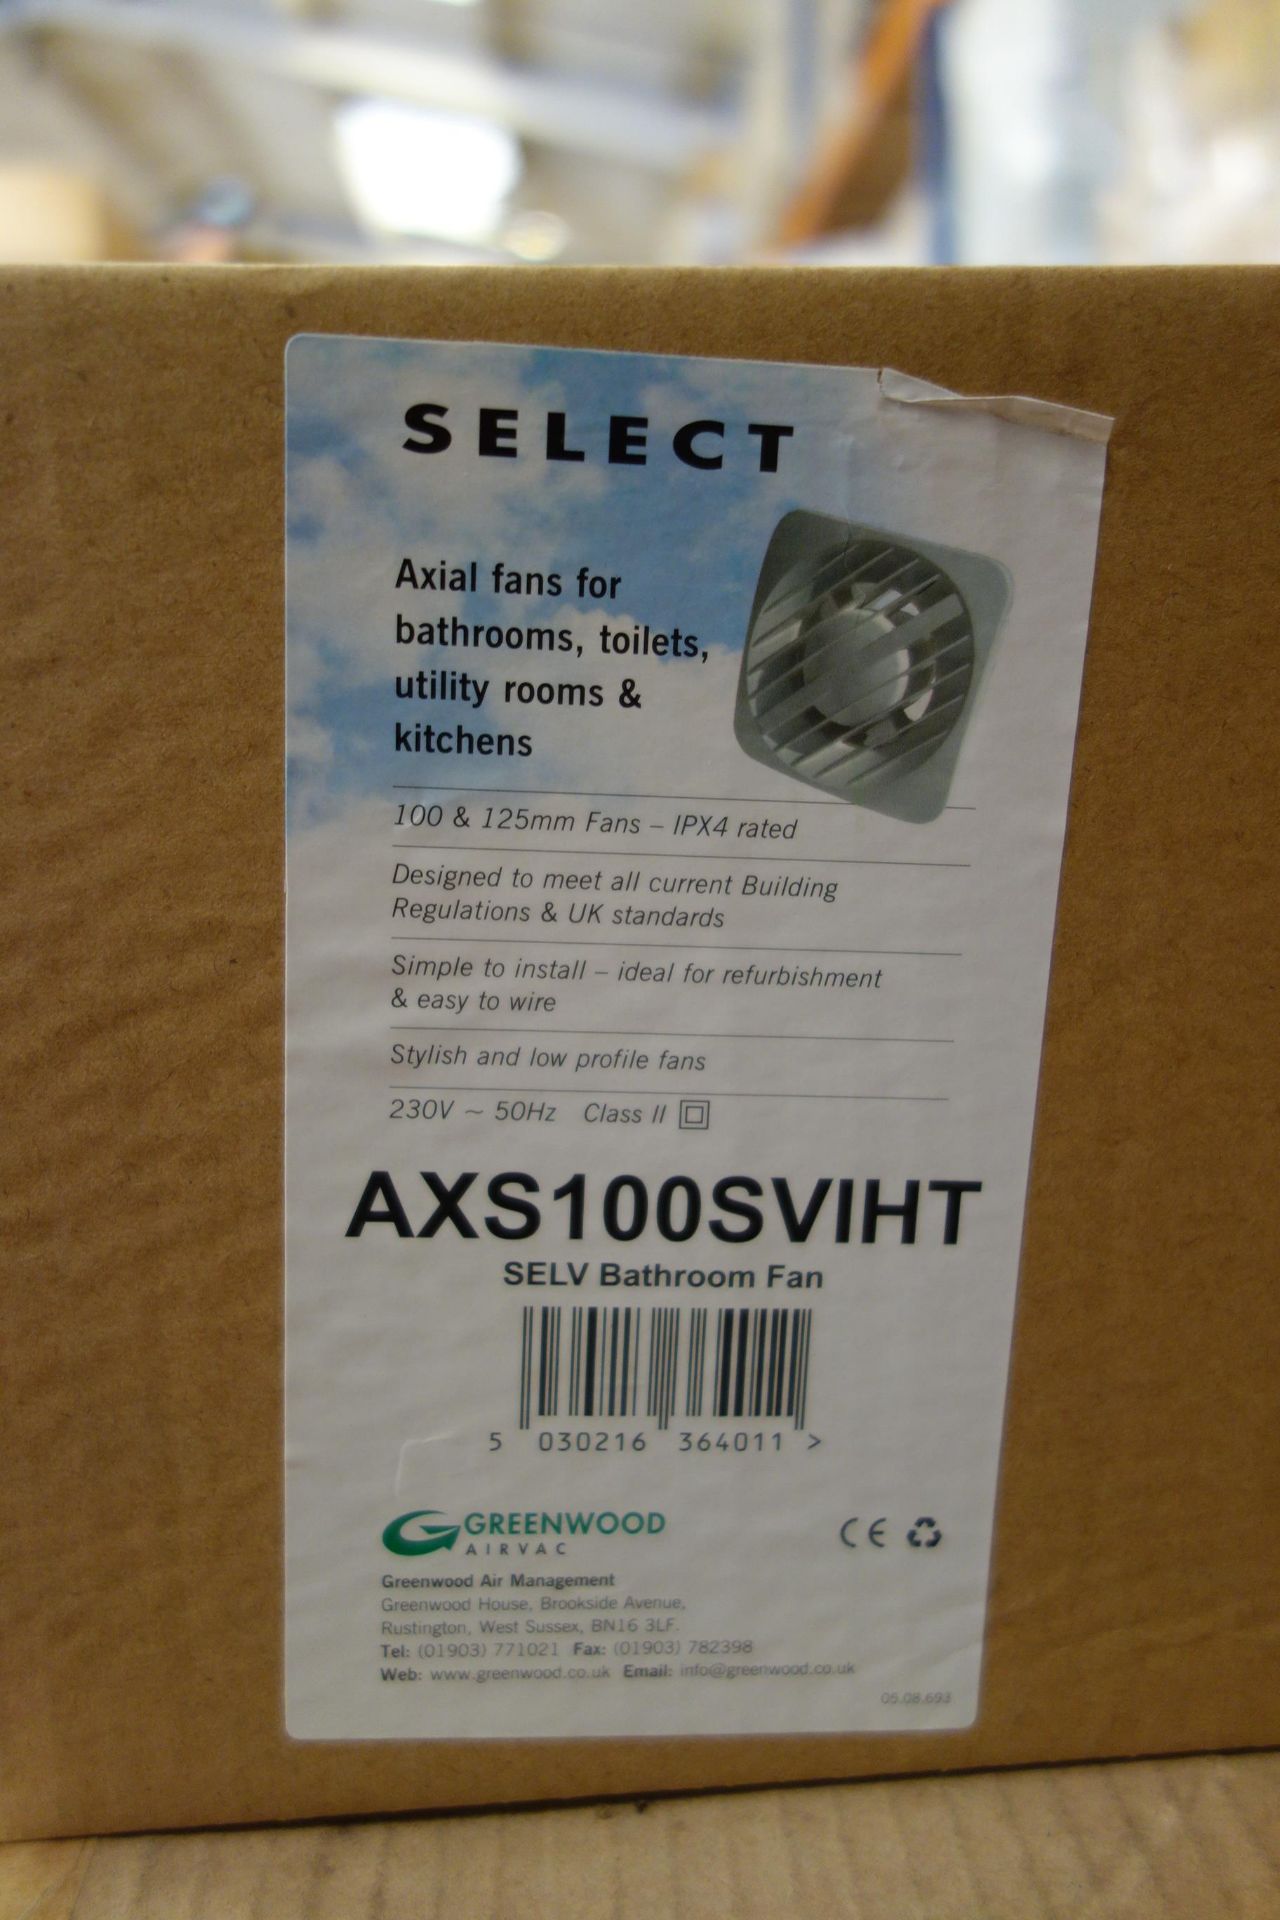 8 X GREENWOOD AX5100SVIHT Axial Fan For Bathrooms, Toilets, Utility Rooms And Kitchens